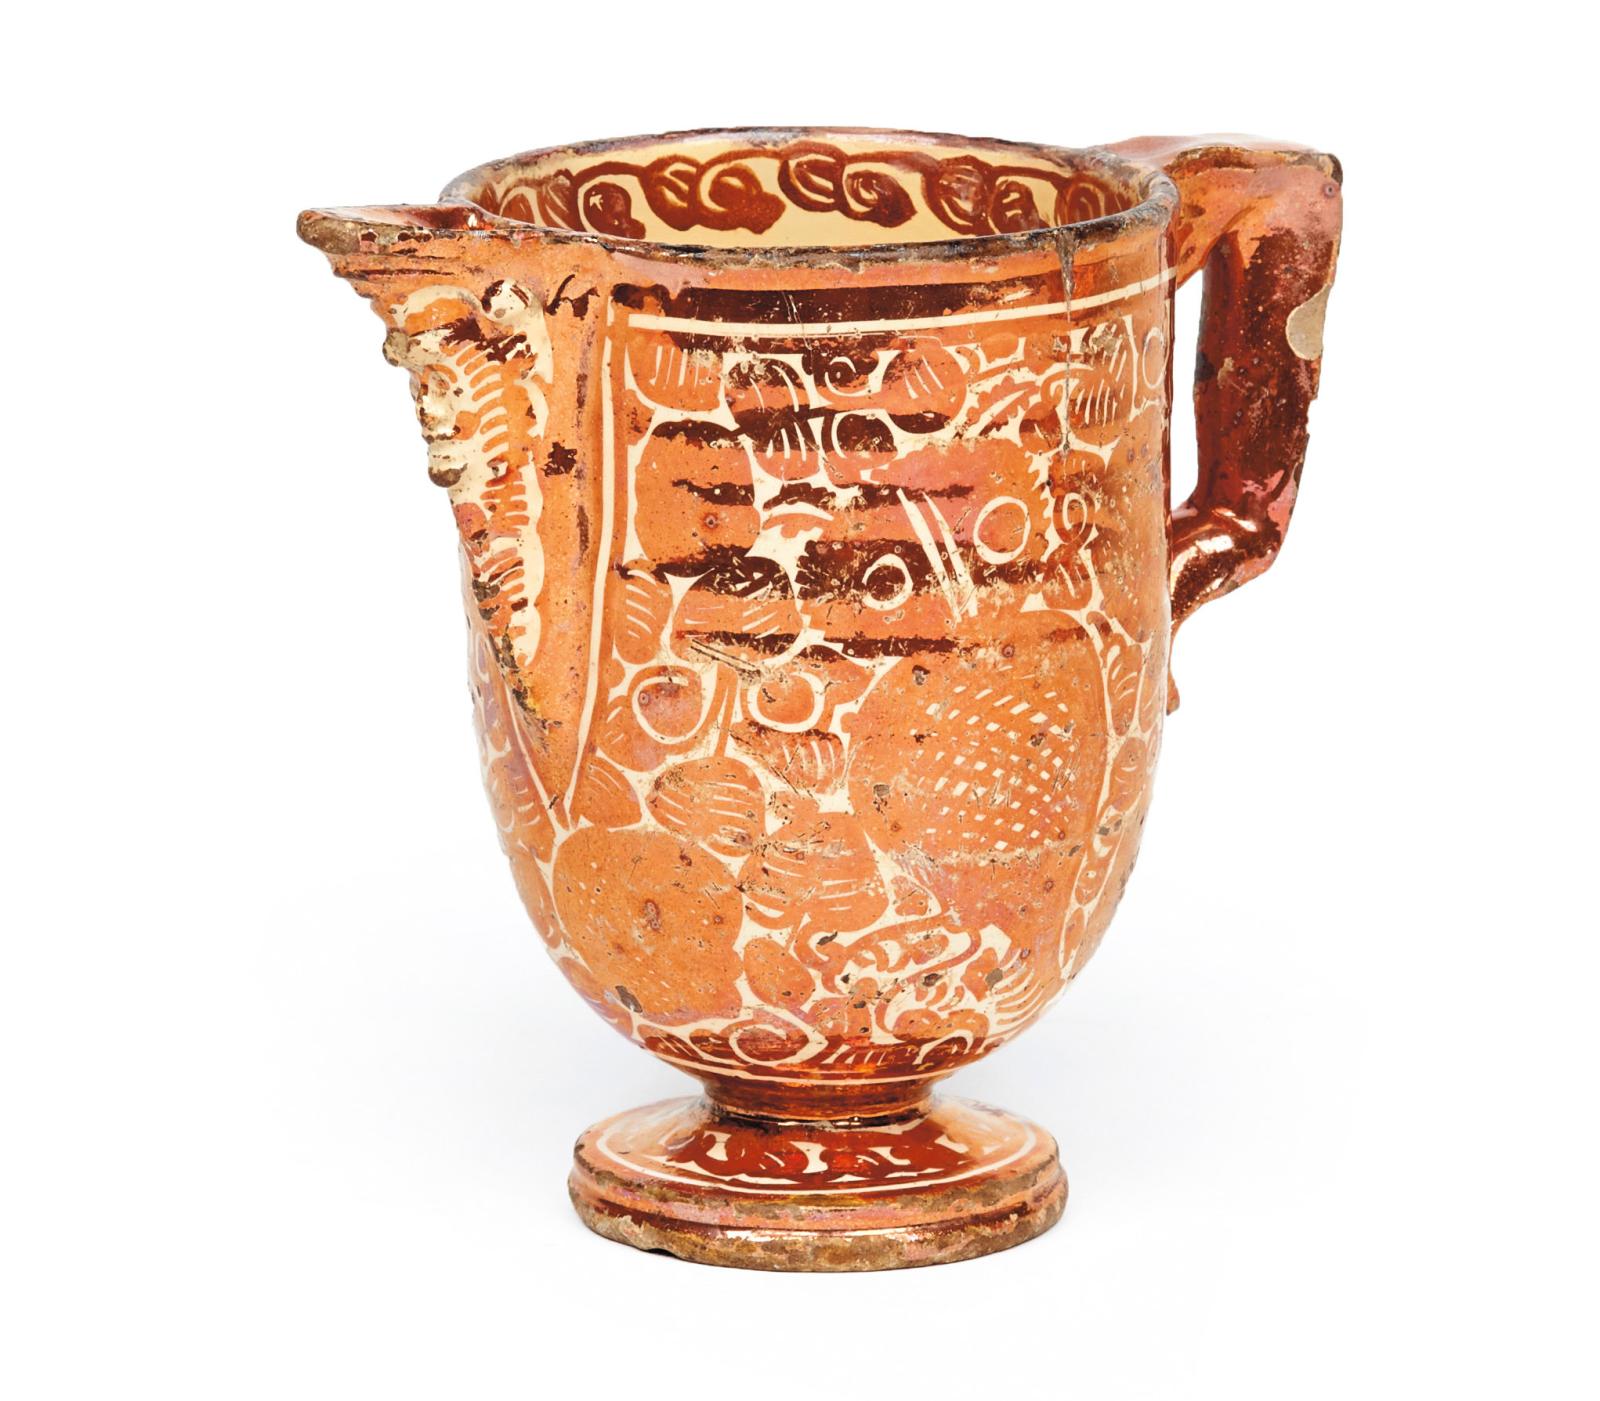 Metallic luster earthenware ewer on a foot, body decorated with tulips and owls in branches, mascaron spout. 17th century, h. 17 cm/6.7 in